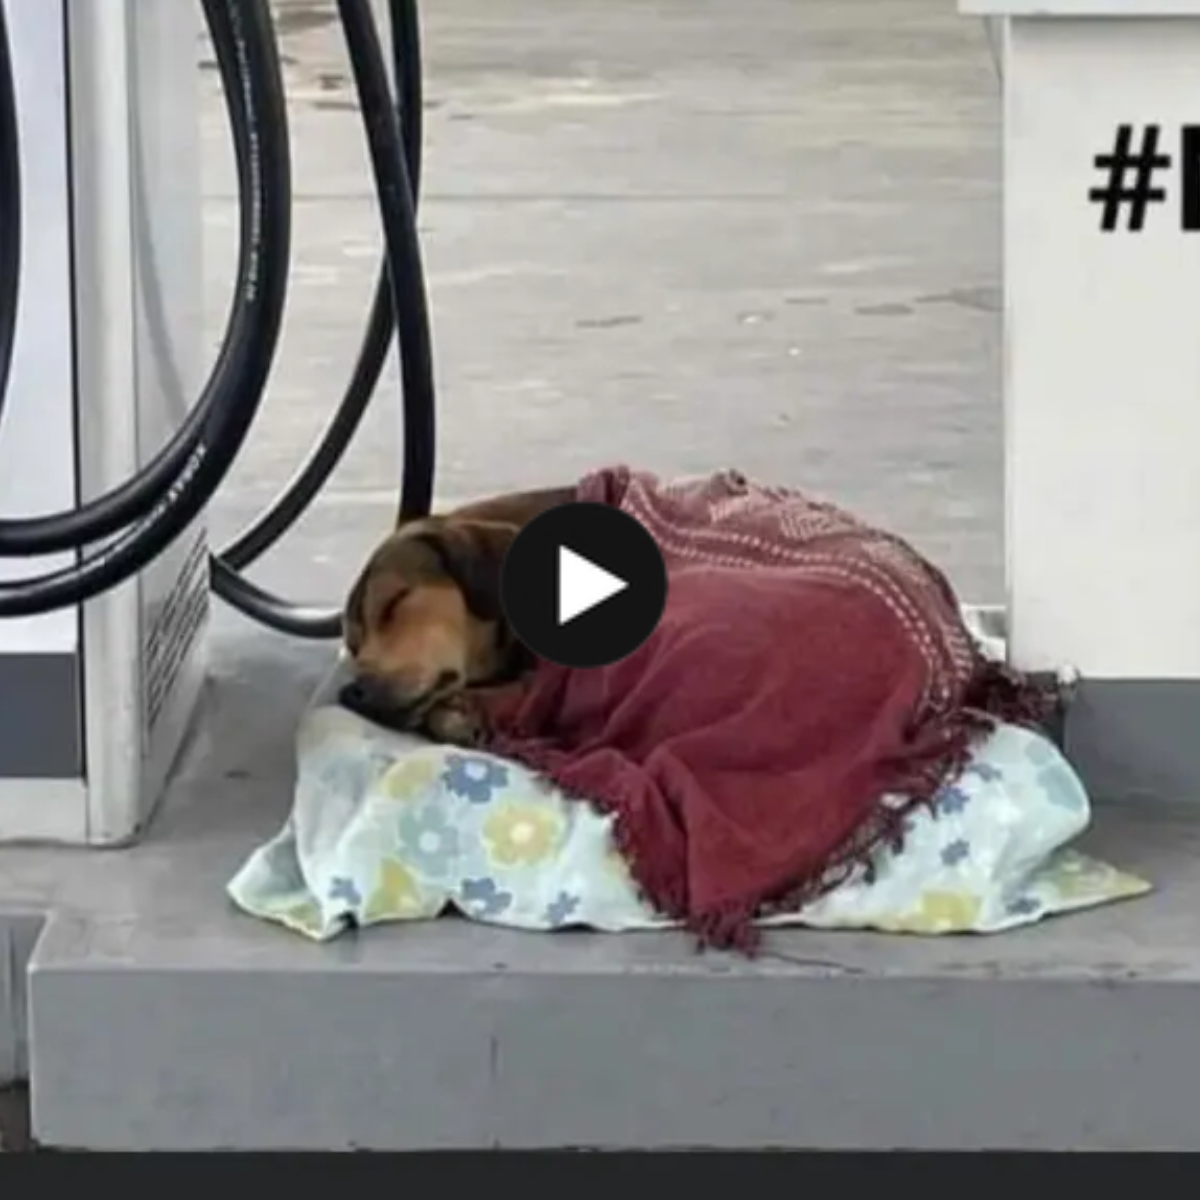 Workers at the petrol station consoled a shivering stray dog by wrapping a warm blanket around its weary frame, evoking sympathy from bystanders.